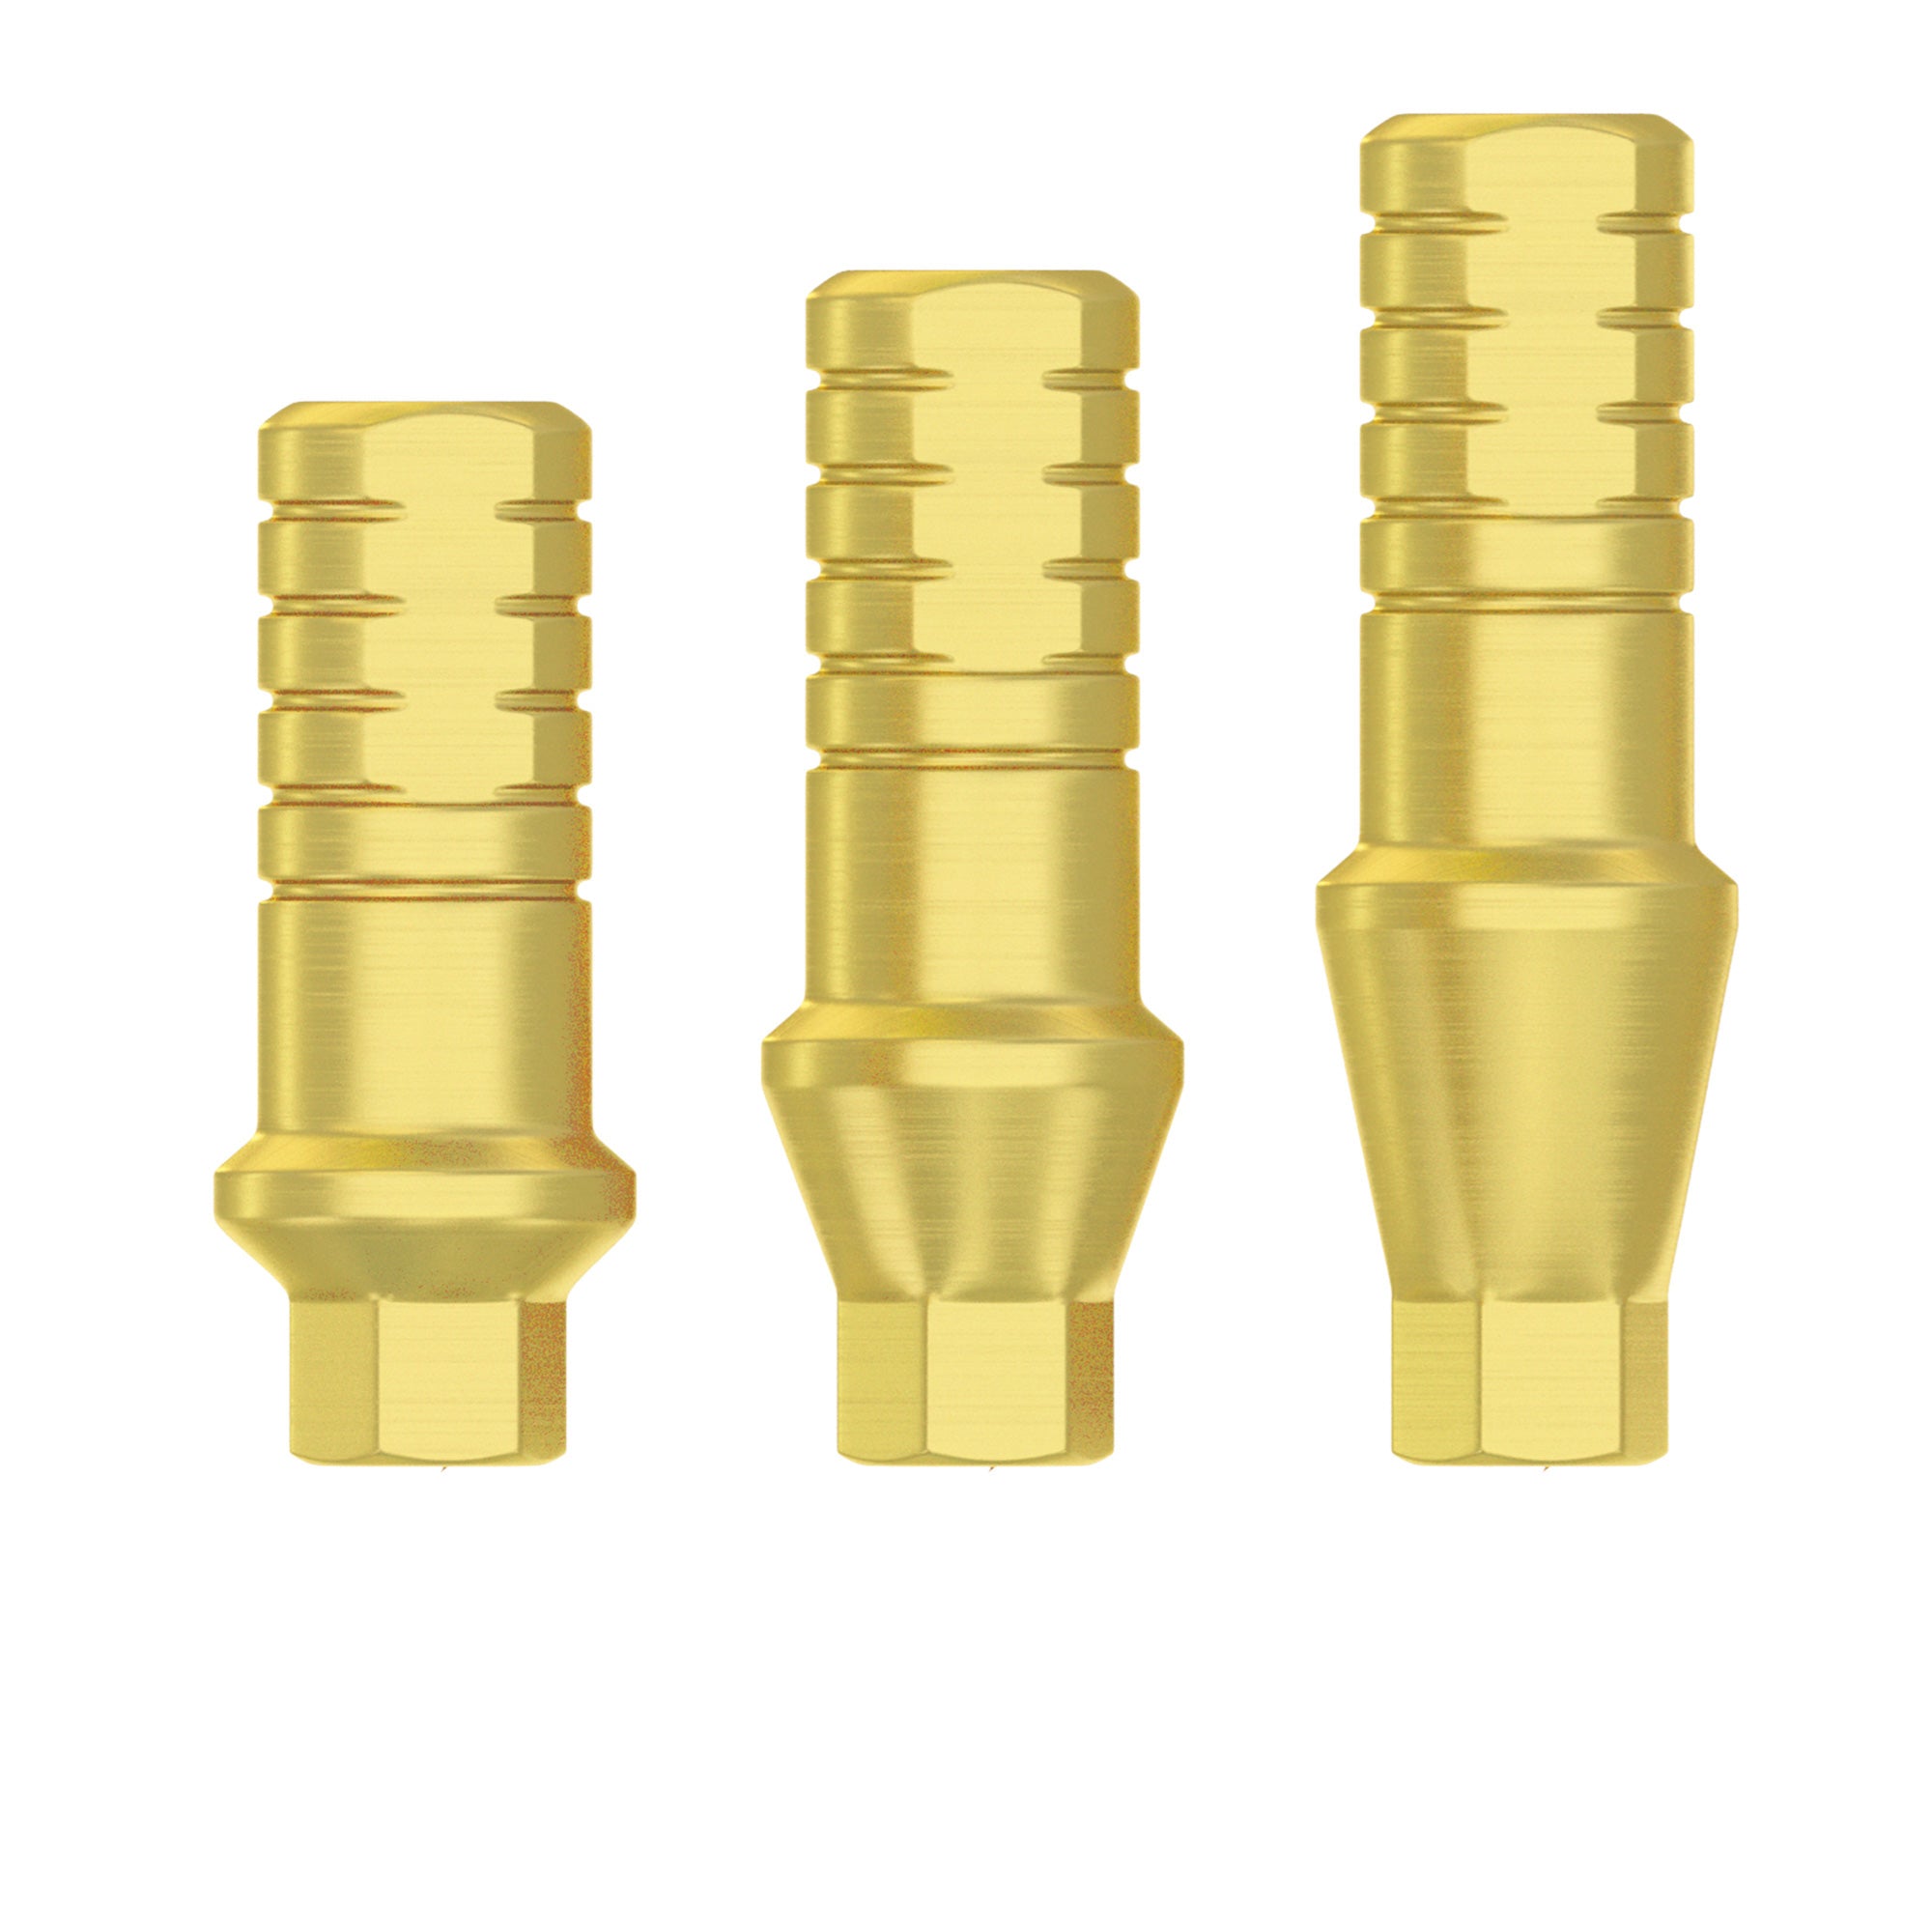 DSI Shoulder Straight Abutment - Conical Connection RP Ø4.3-5.0mm